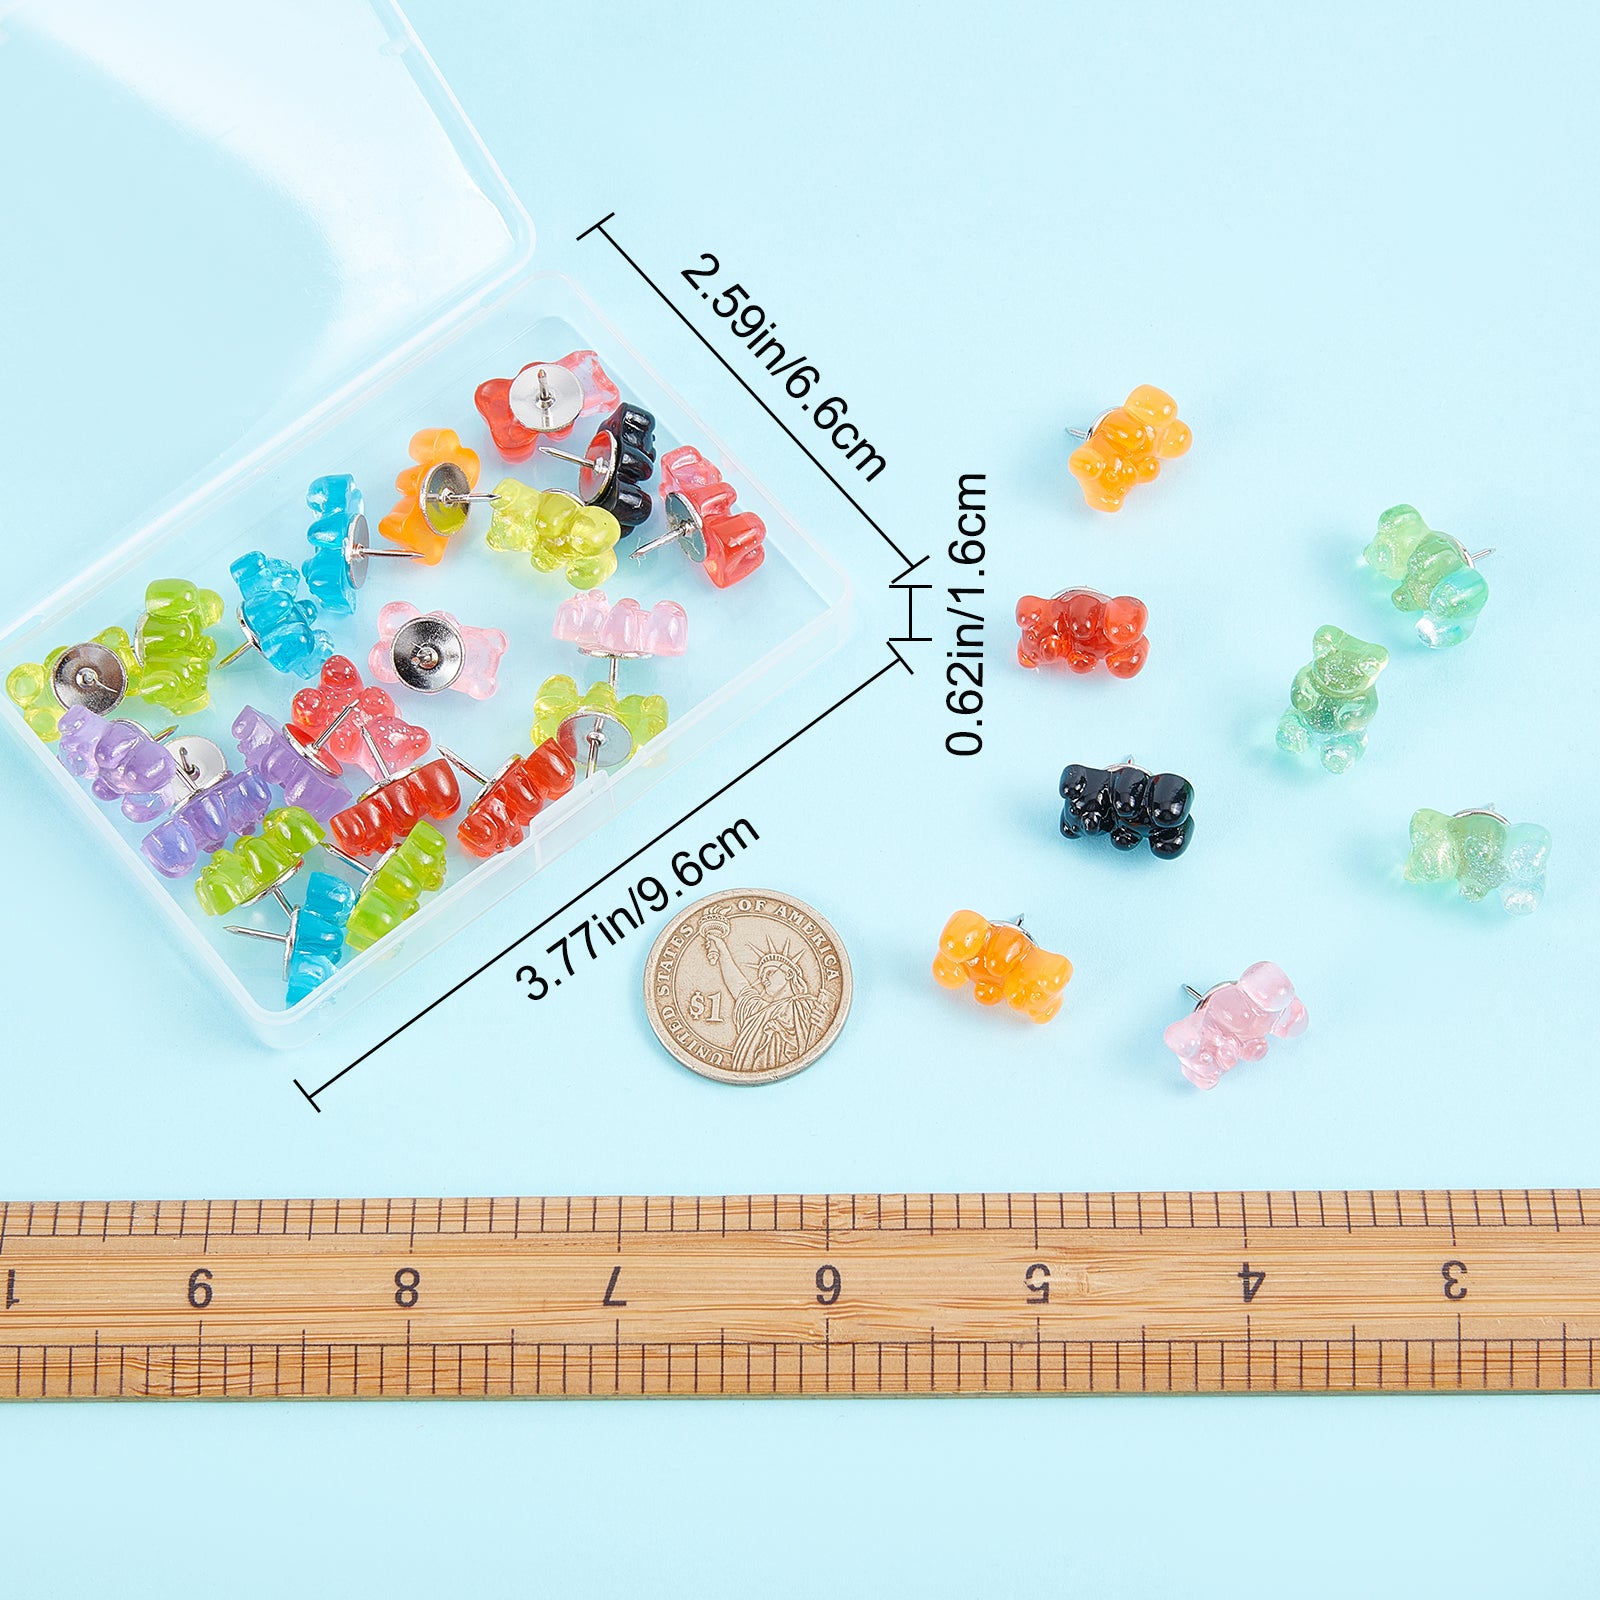 Plastic Bear Shape Push Pins, Thumbtack, with Steel Pin, for Home School Office Notice Board Cork Board, Mixed Color, 18x11mm, 30pcs/box